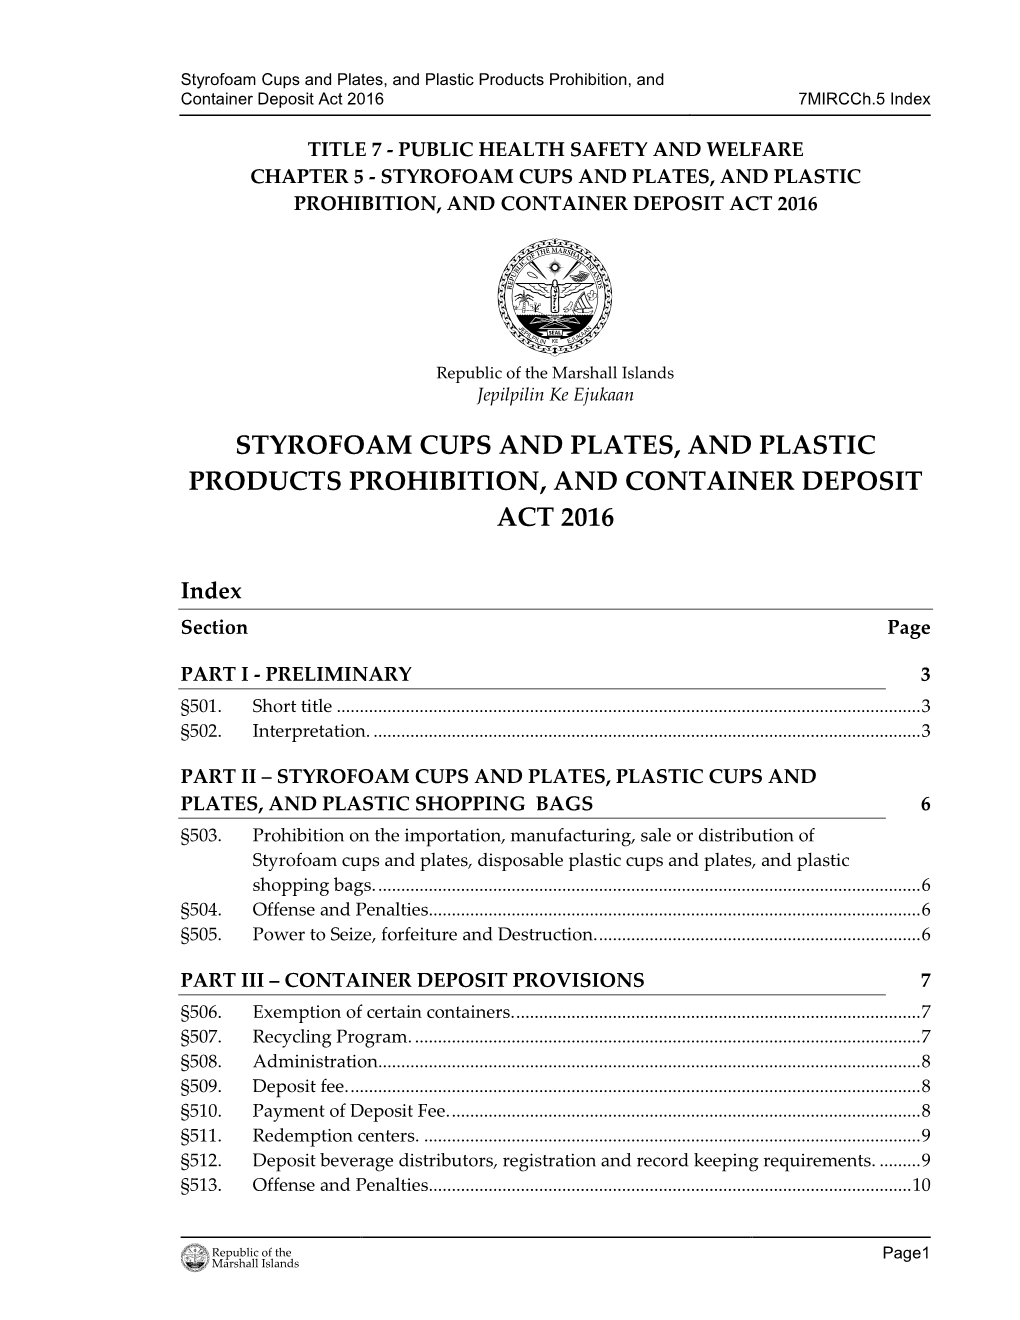 Styrofoam Cups and Plates, and Plastic Products Prohibition, and Container Deposit Act 2016 7Mircch.5 Index